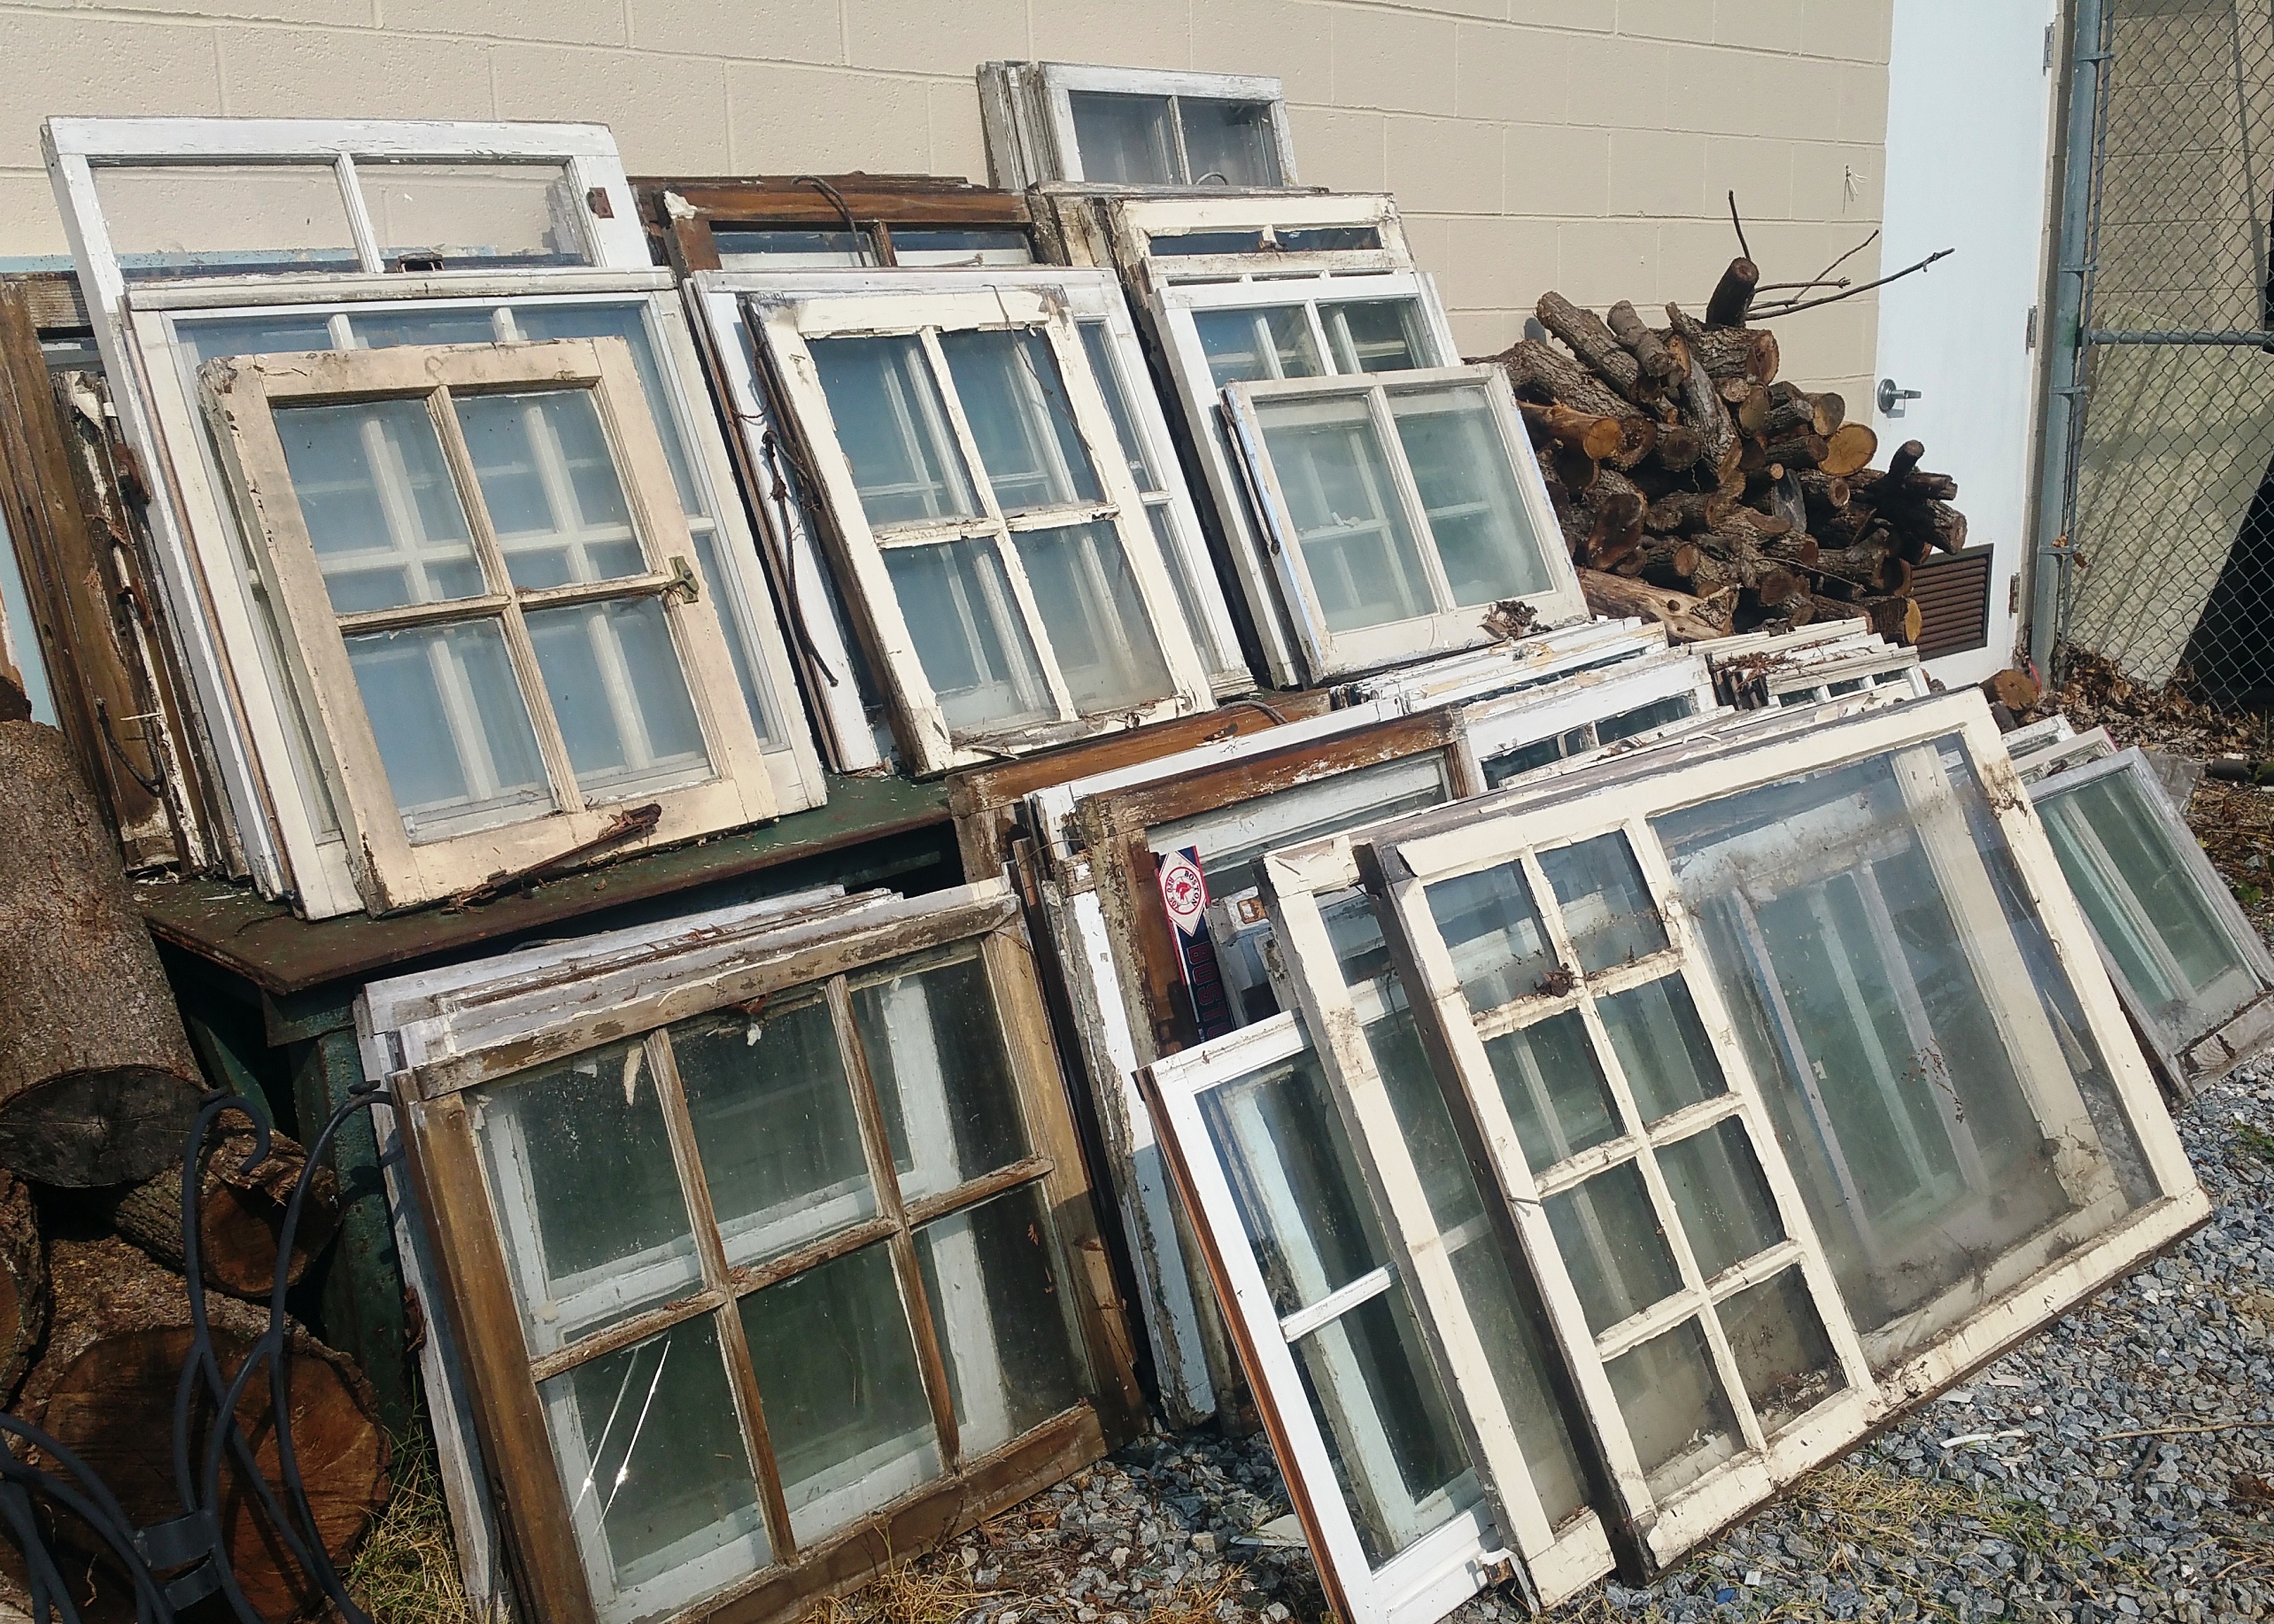 Pick out your Old Windows